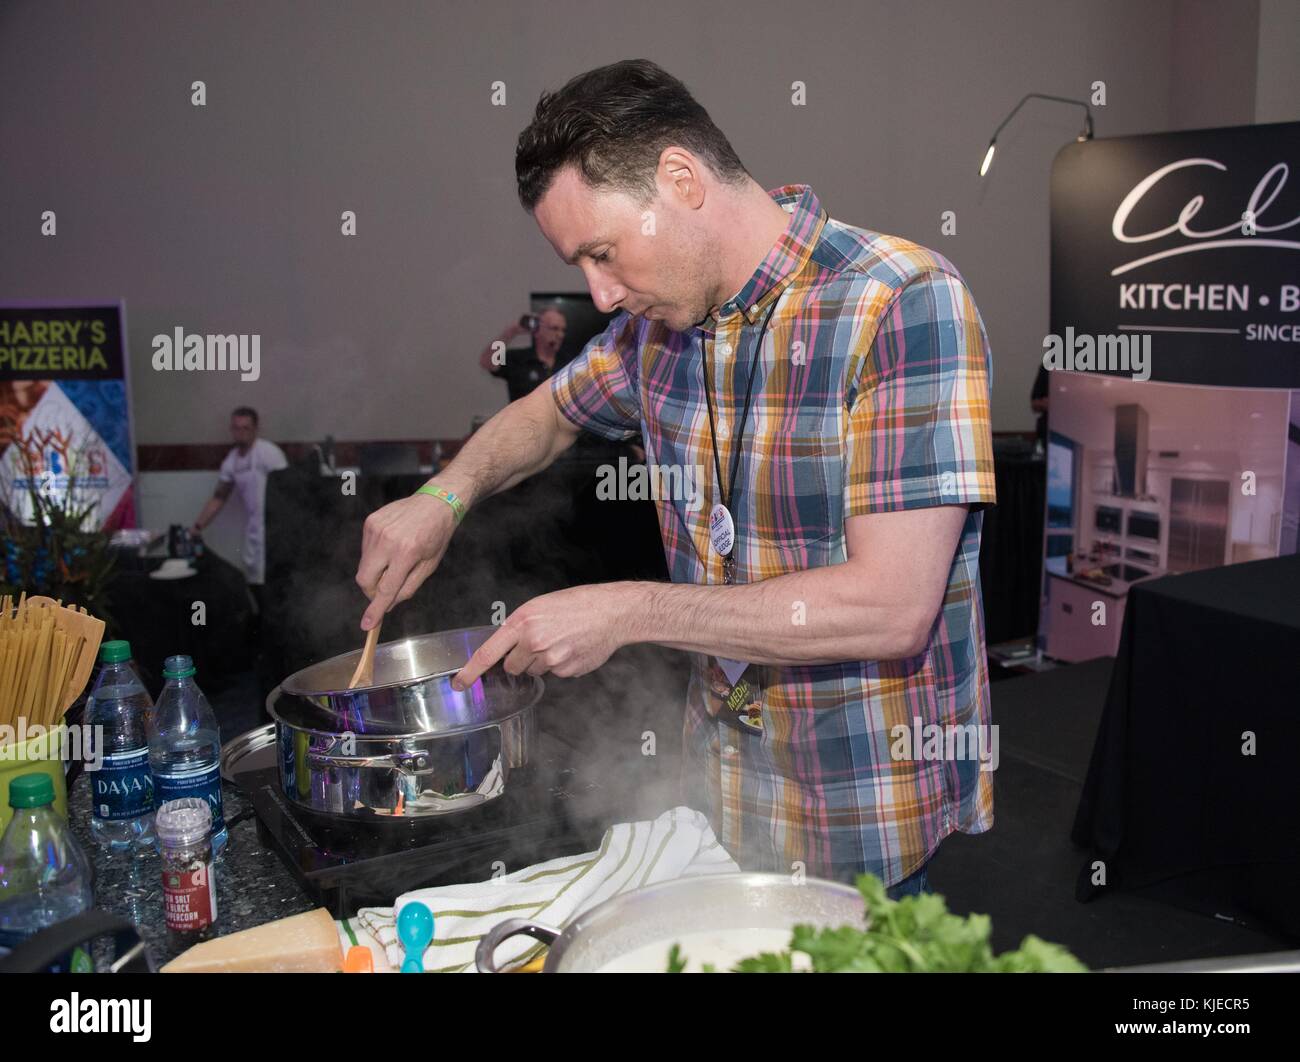 HALLANDALE, FL - MAY 20: Rocco DiSpirito attends the Savor the flavors from South Florida's Top Restaurants at the Obies: A Taste of South Florida on May 20, 2016 in Hallandale, Florida.   People:  Rocco DiSpirito Stock Photo